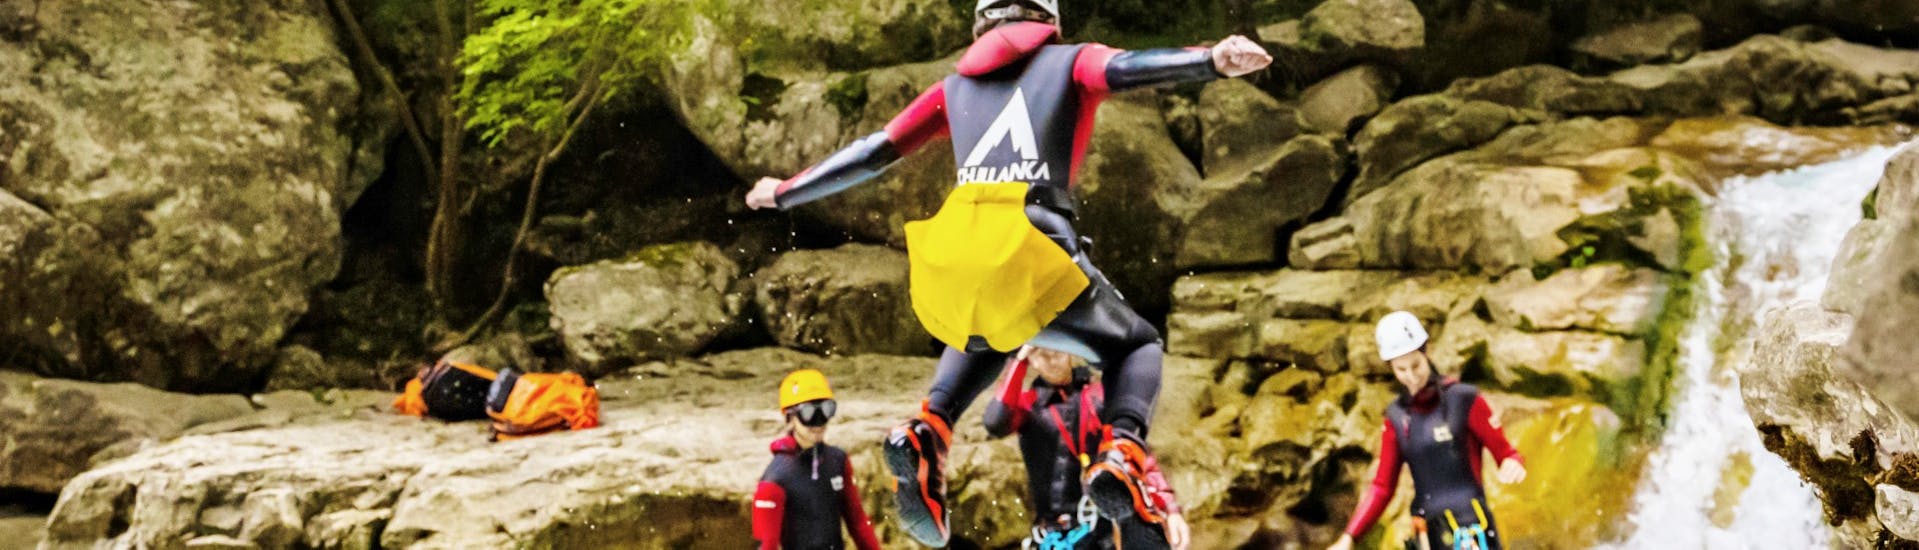 Sportliche Canyoning-Tour in Rocchetta Nervina - Canyon of Barbaira.